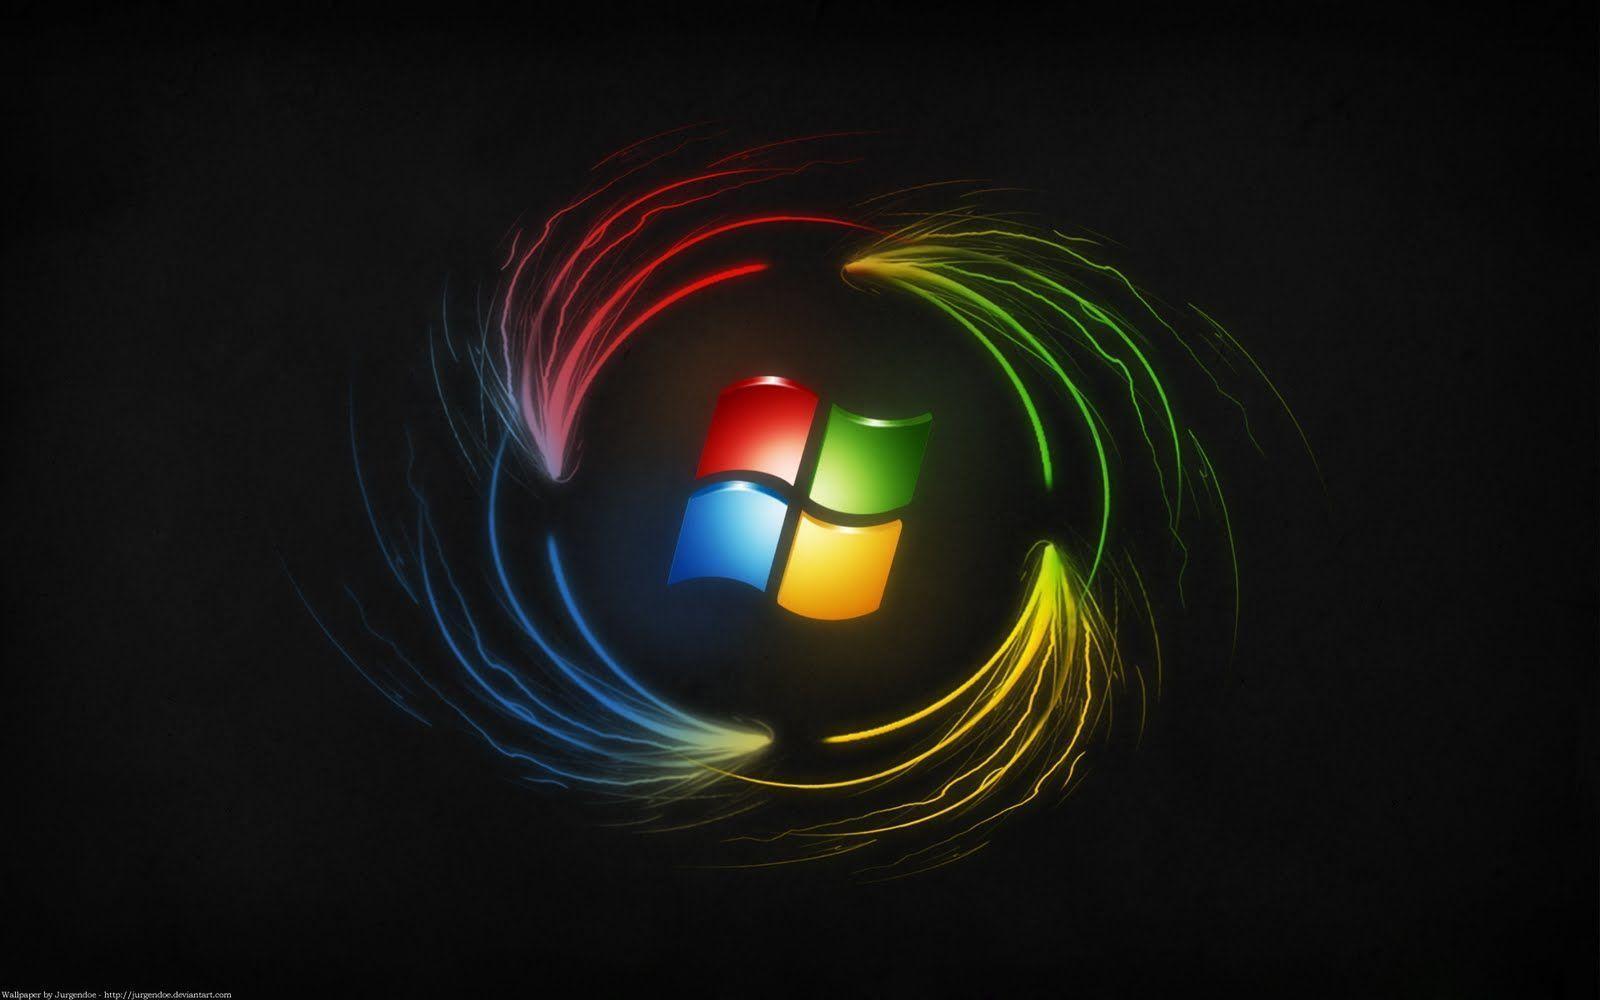 Windows 8 HD Wallpapers with Win8 Logo